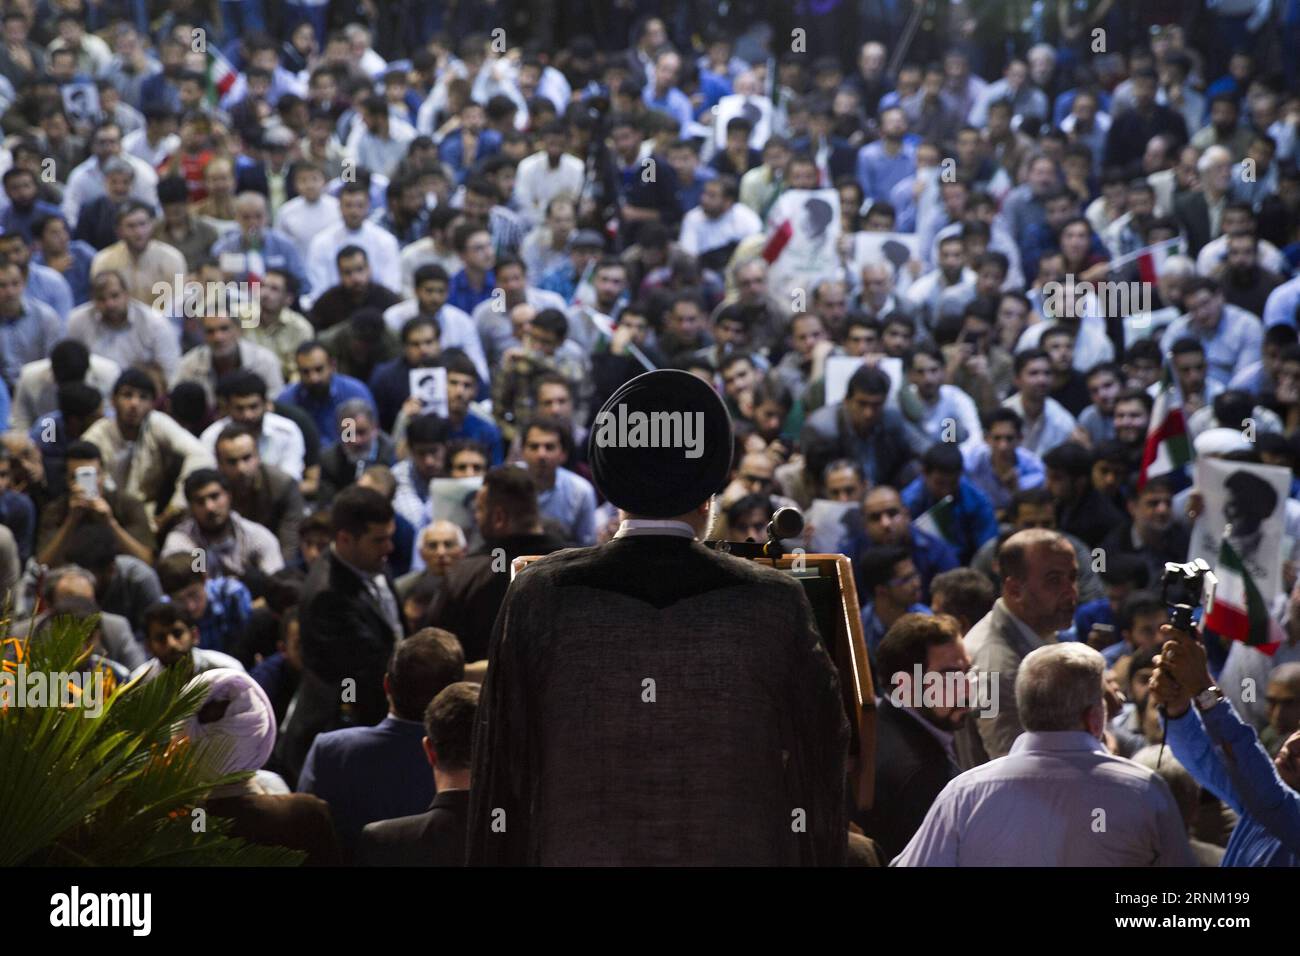 (170430) -- TEHRAN, April 30, 2017 () -- Supporters listen to the speech of presidential candidate Ebrahim Raisi during a campaign rally in Tehran, Iran, April 29, 2017. Iran s 12th presidential election is slated for May 19. () (zhf) IRAN-TEHRAN-EBRAHIM RAISI-PRESIDENTIAL ELECTION CAMPAIGN xinhua PUBLICATIONxNOTxINxCHN   TEHRAN April 30 2017 Supporters Lists to The Speech of Presidential Candidate Ebrahim Raisi during a Campaign Rally in TEHRAN Iran April 29 2017 Iran S 12th Presidential ELECTION IS slated for May 19 zhf Iran TEHRAN Ebrahim Raisi Presidential ELECTION Campaign XINHUA PUBLICAT Stock Photo